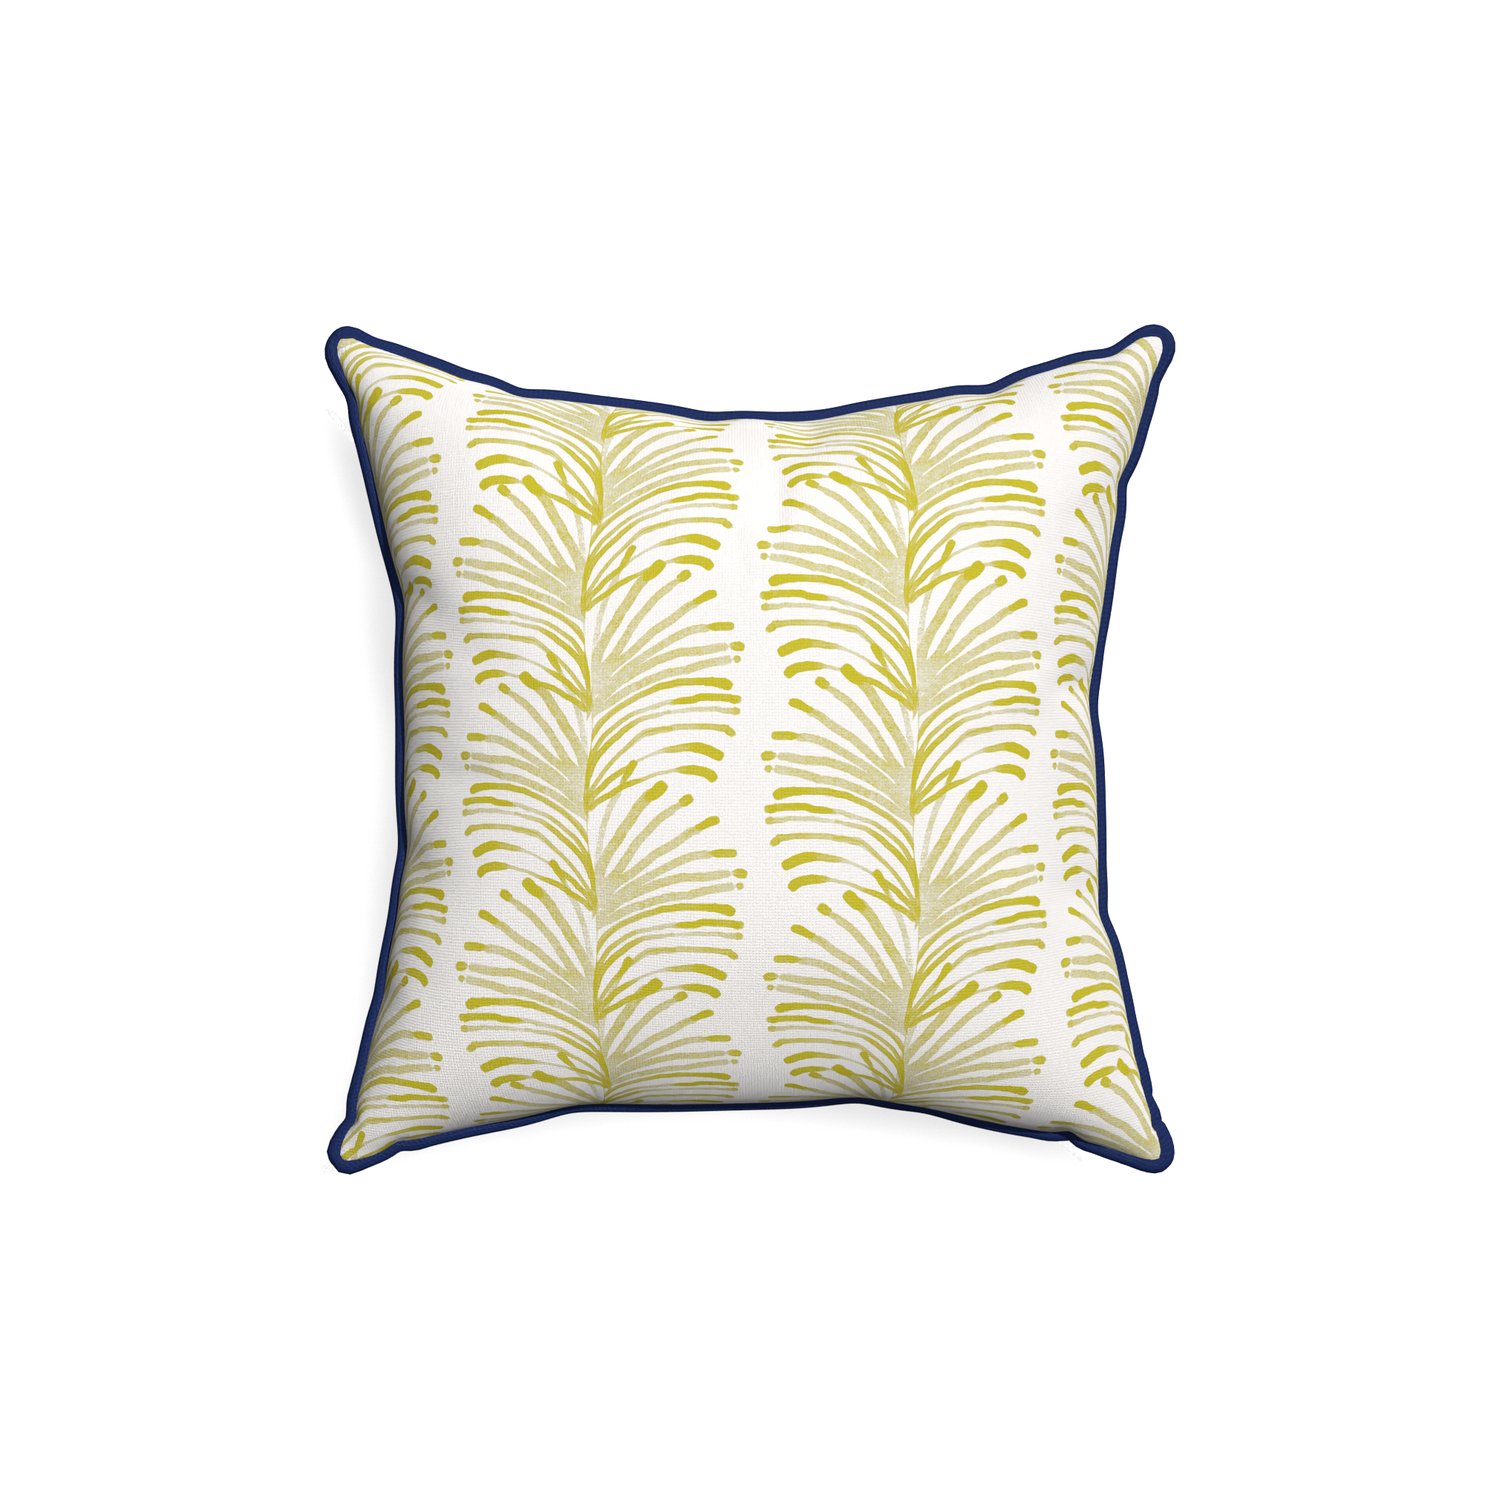 18-square emma chartreuse custom pillow with midnight piping on white background